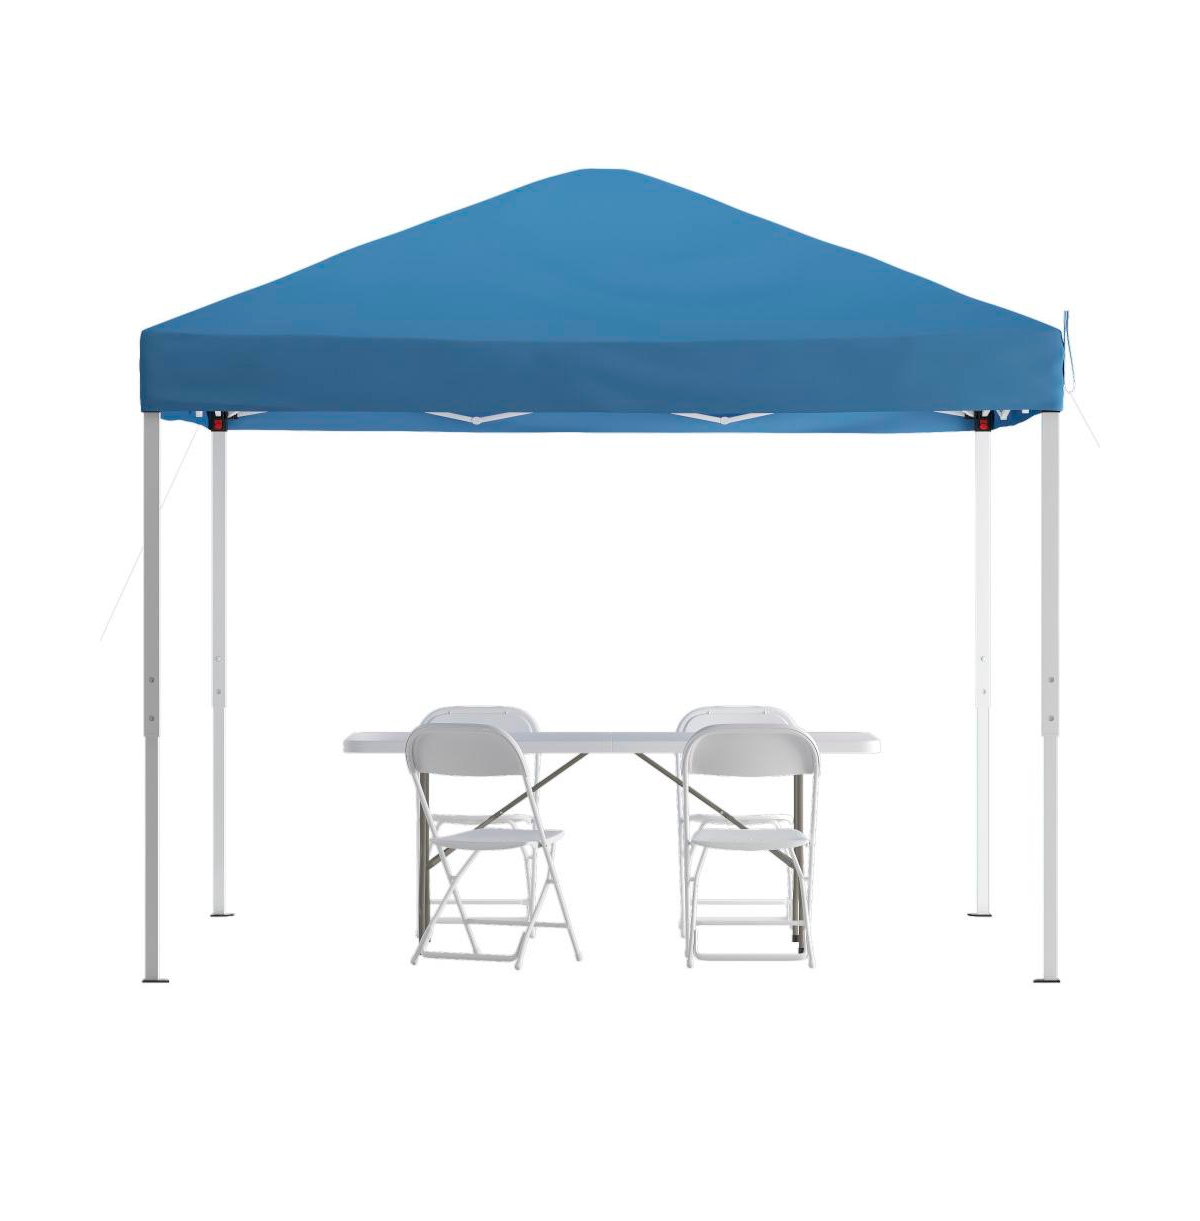 Outdoor Event/Tailgate Set With Pop Up Event Canopy With Carry Bag, Bi-Fold Table And 4 Folding Chairs - White